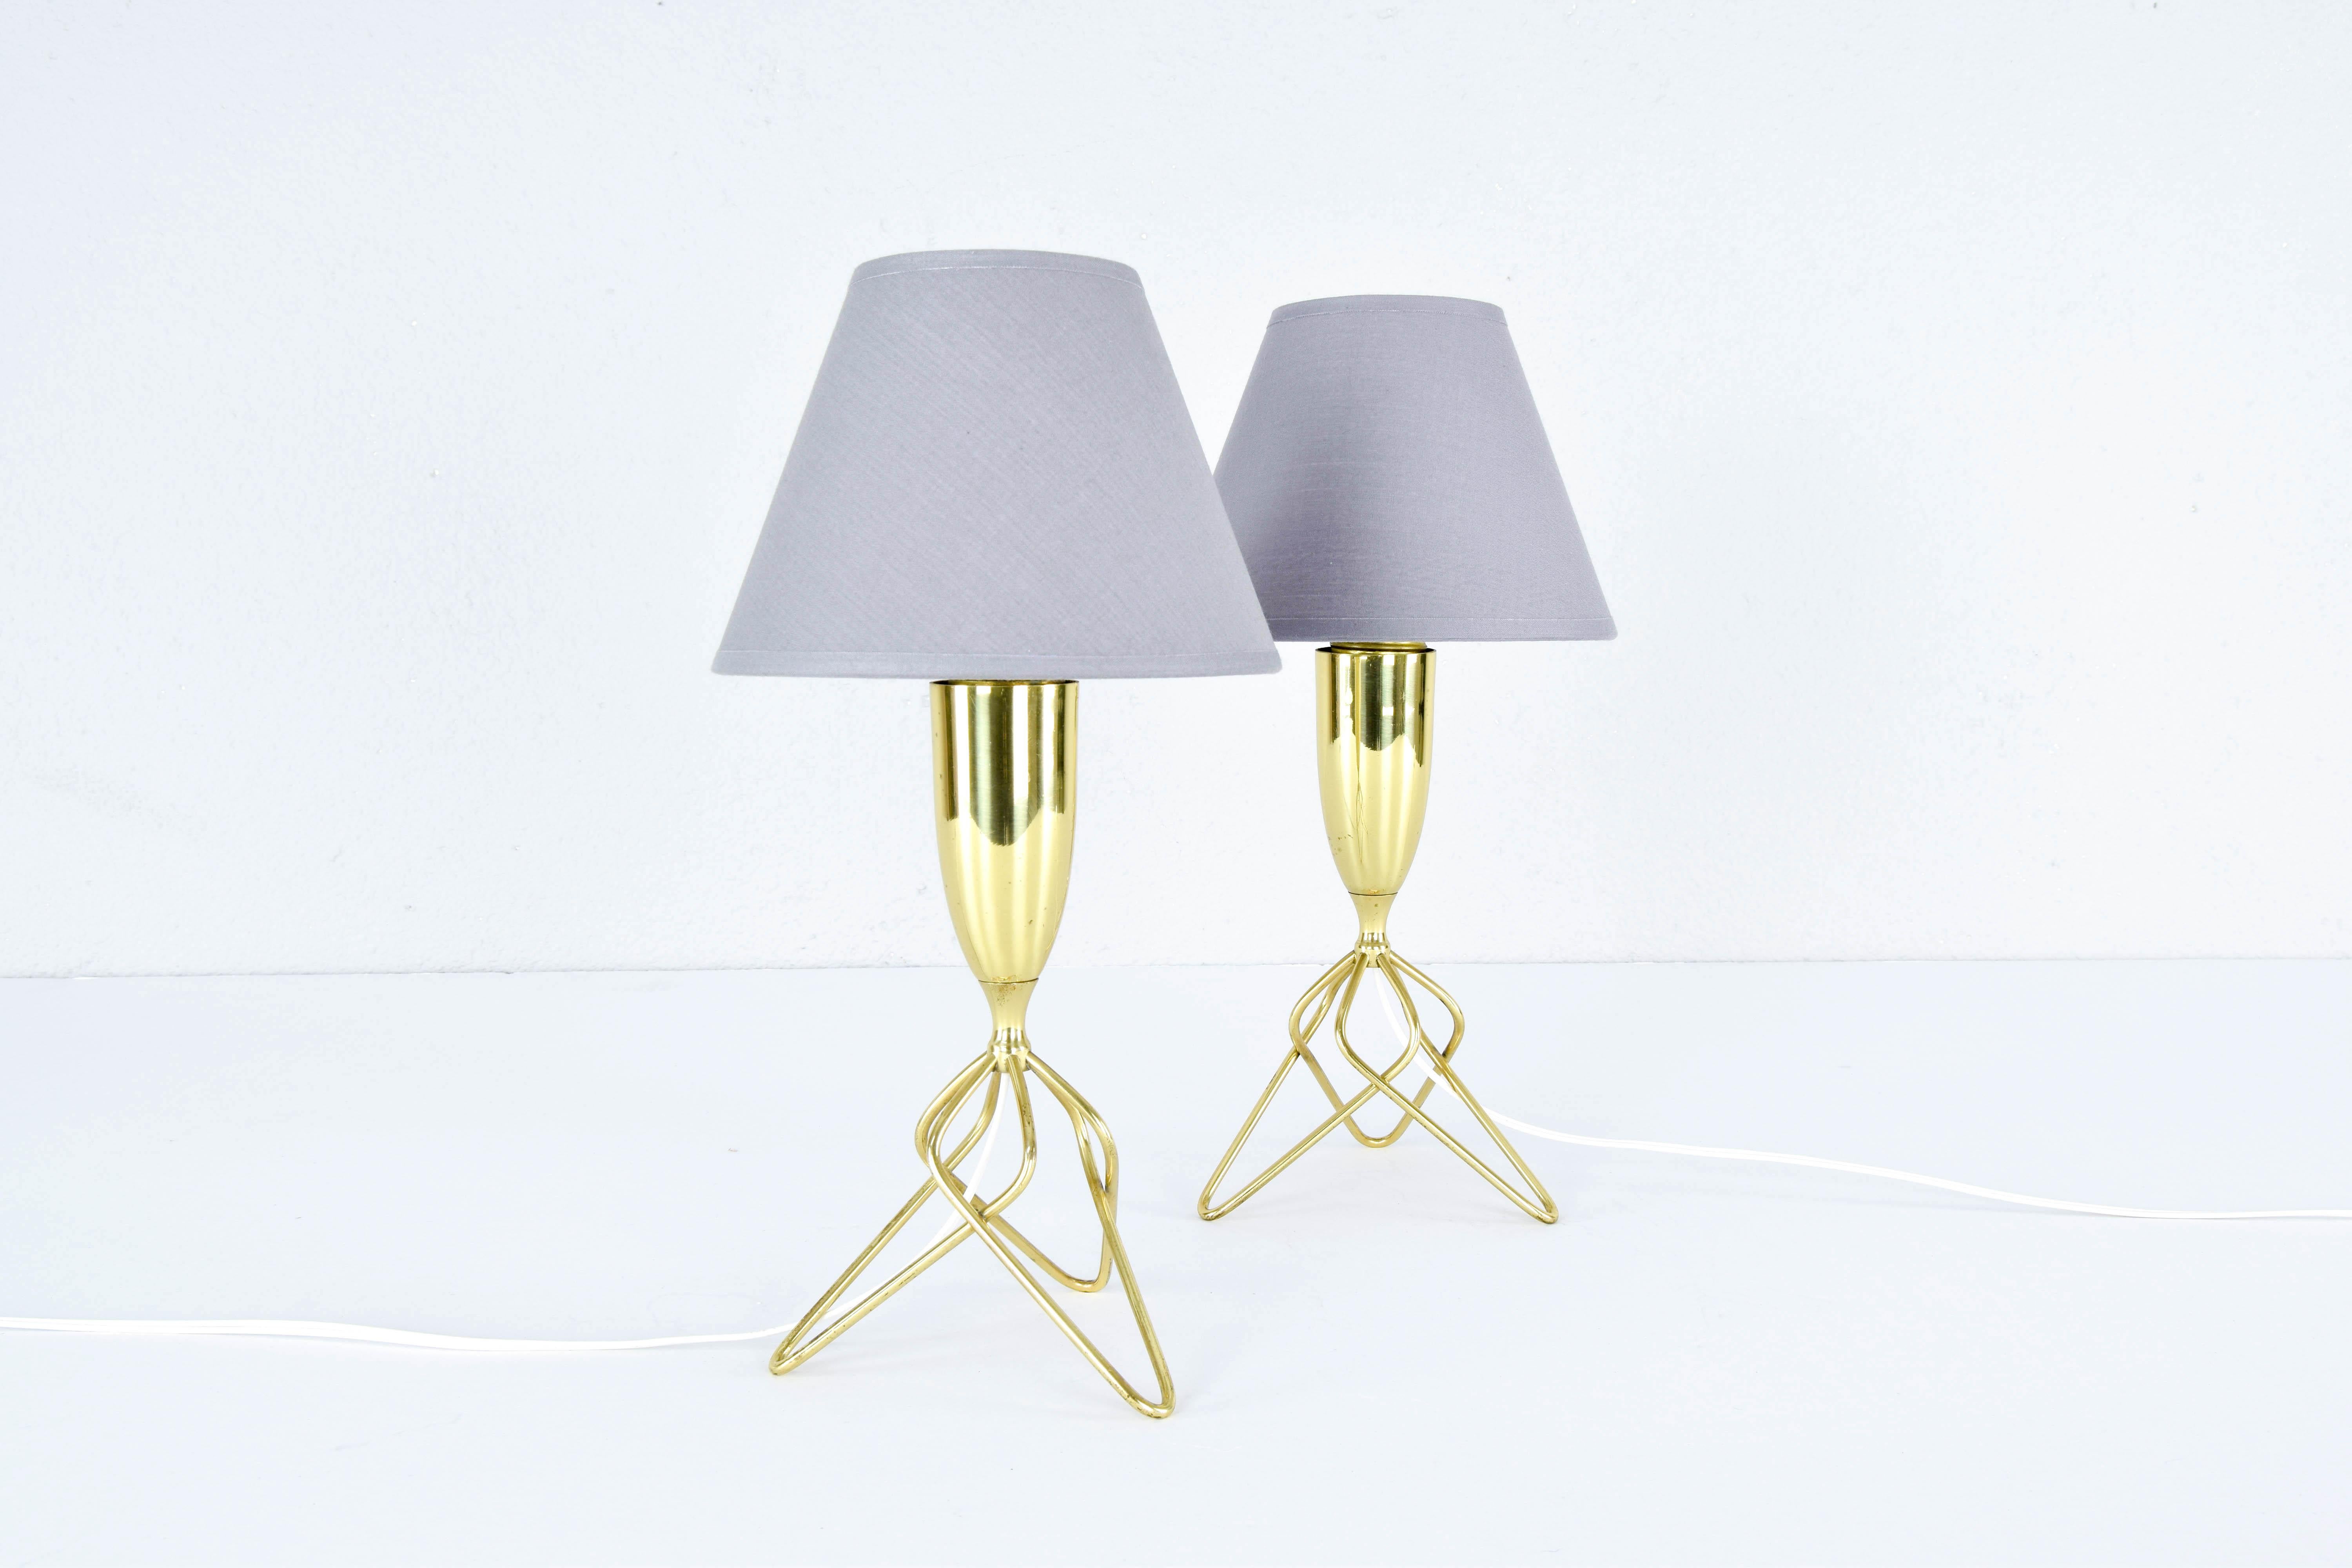 Pair of Scandinavian Brass Tripod Table Lamps with Gray Lampshades, Denmark 60s For Sale 3